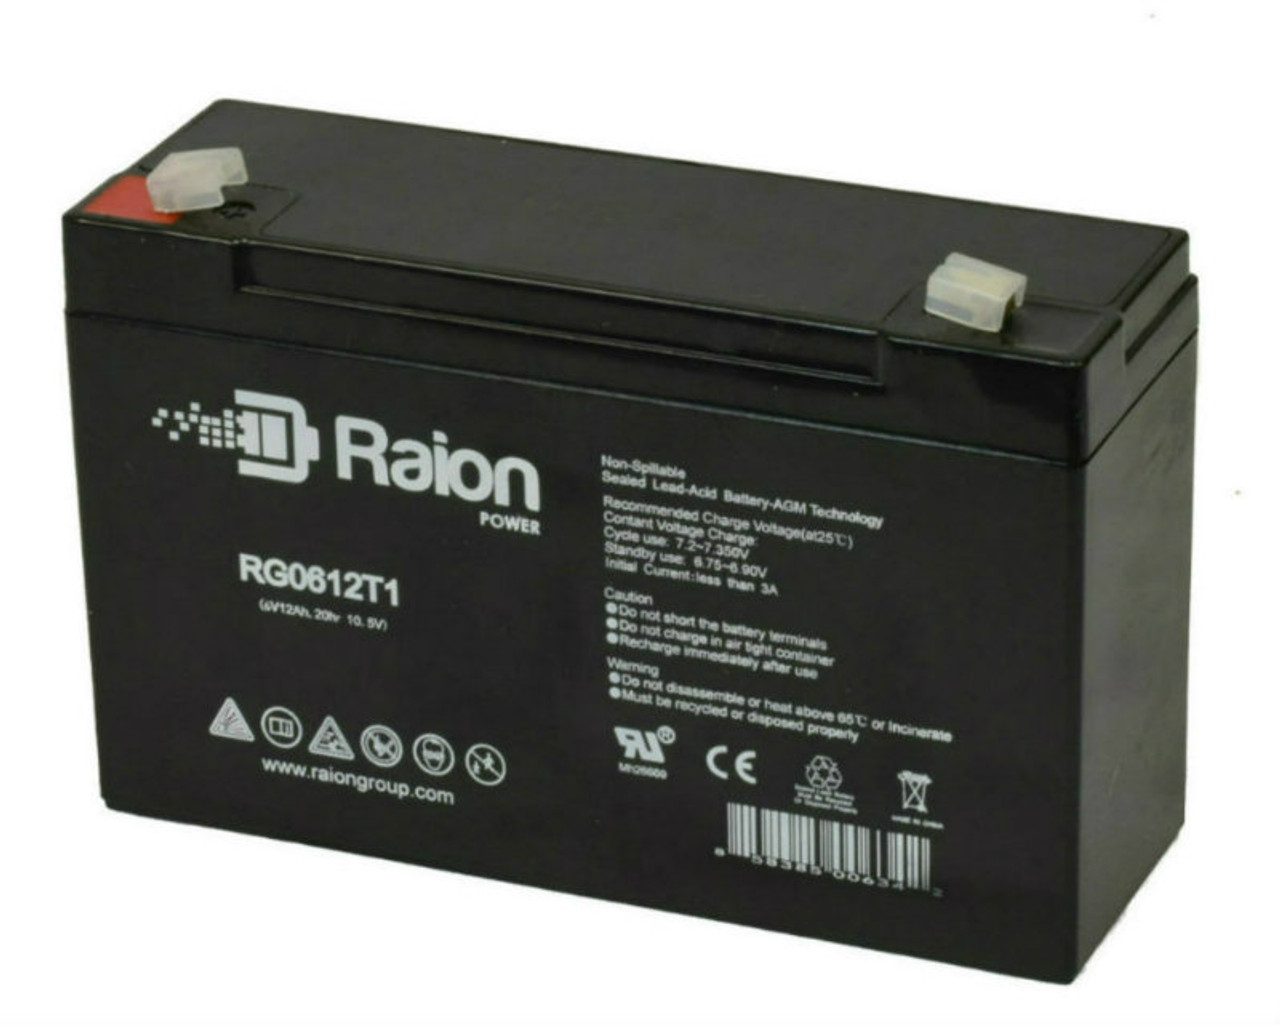 Raion Power RG06120T1 Replacement Emergency Light Battery for Para Systems 2ET6S88